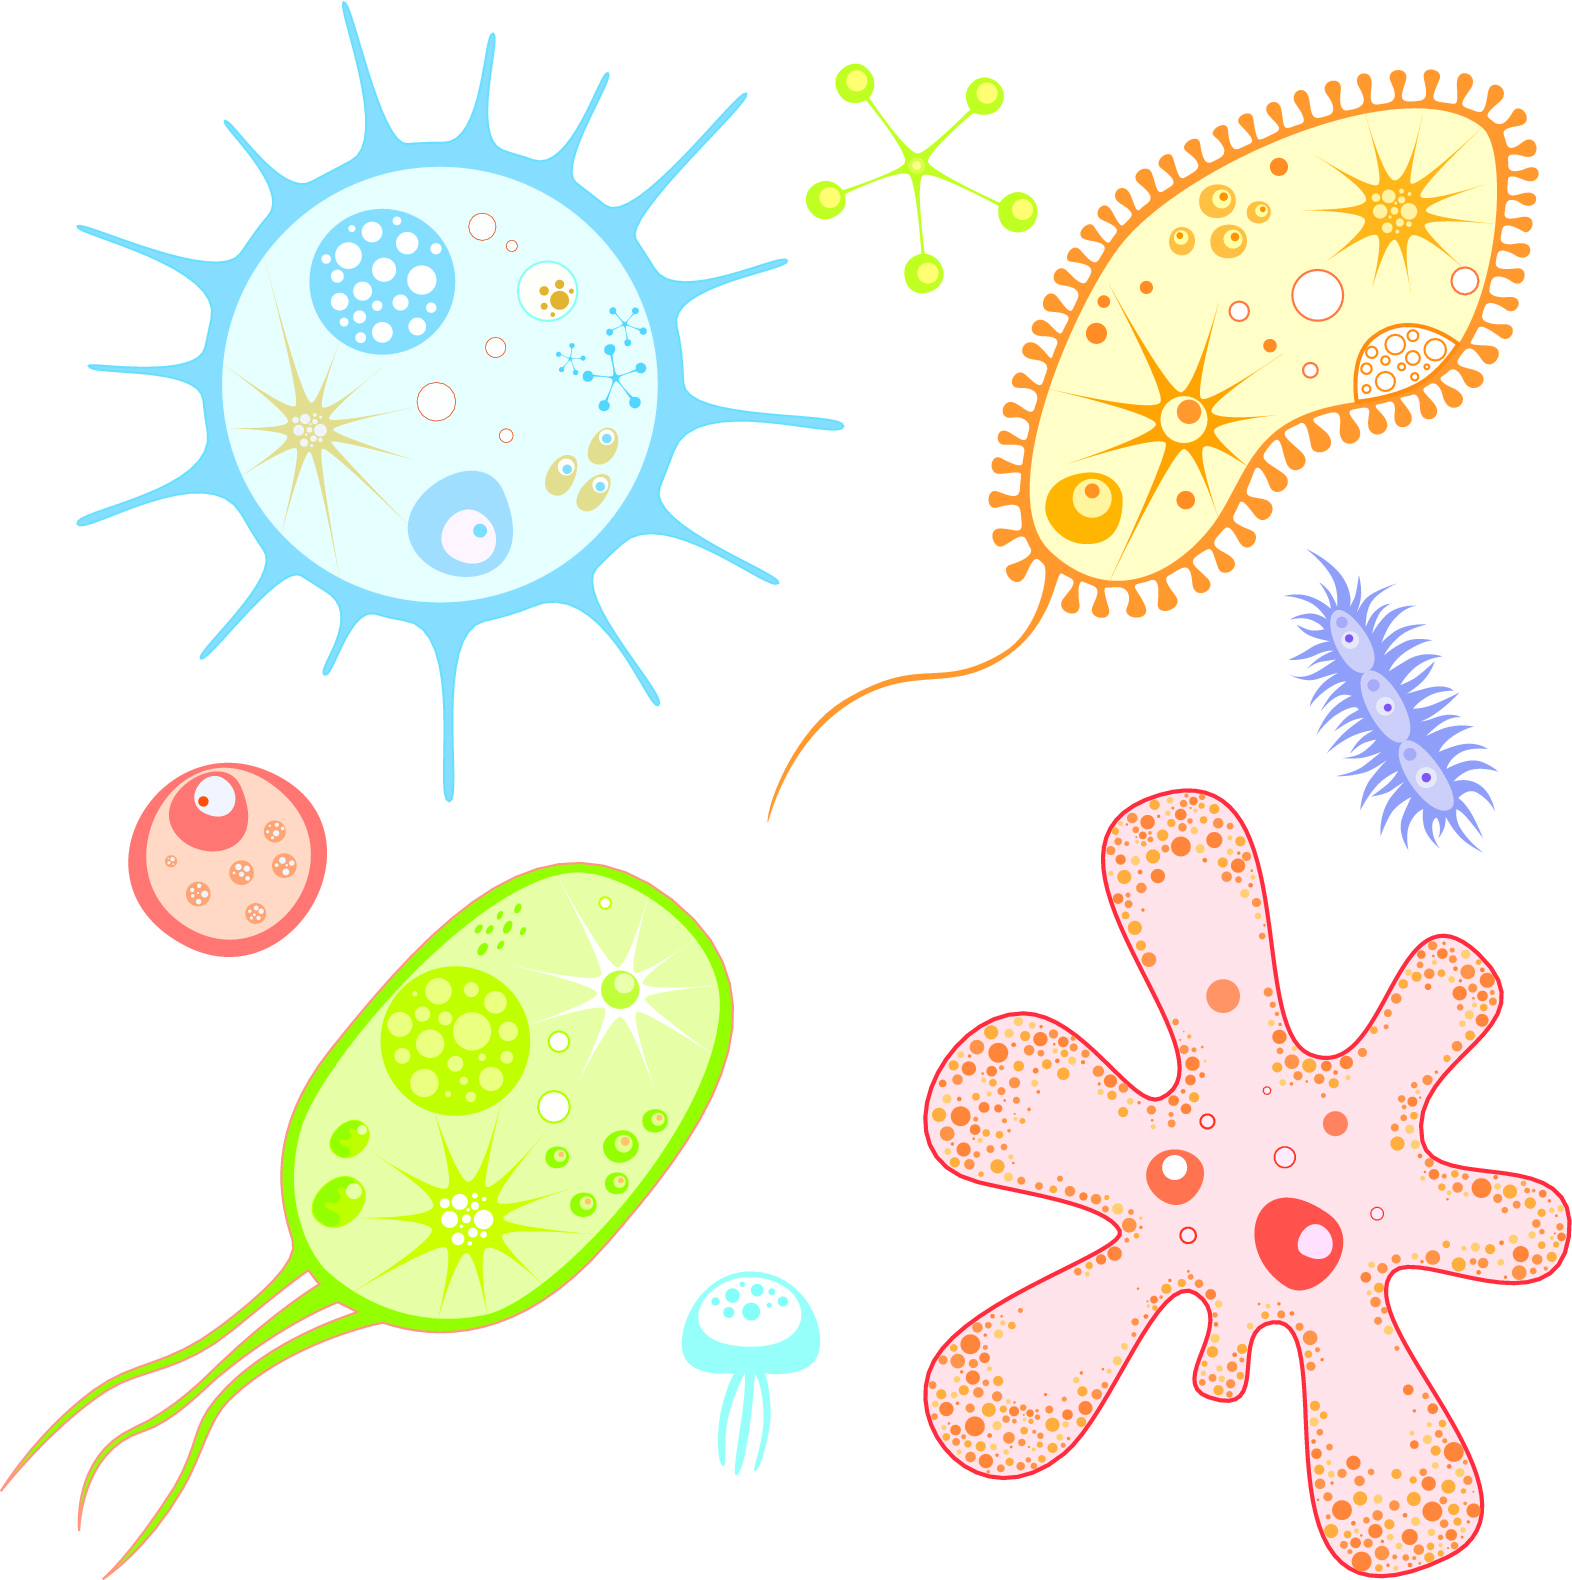 microbes and infection instructions to authors